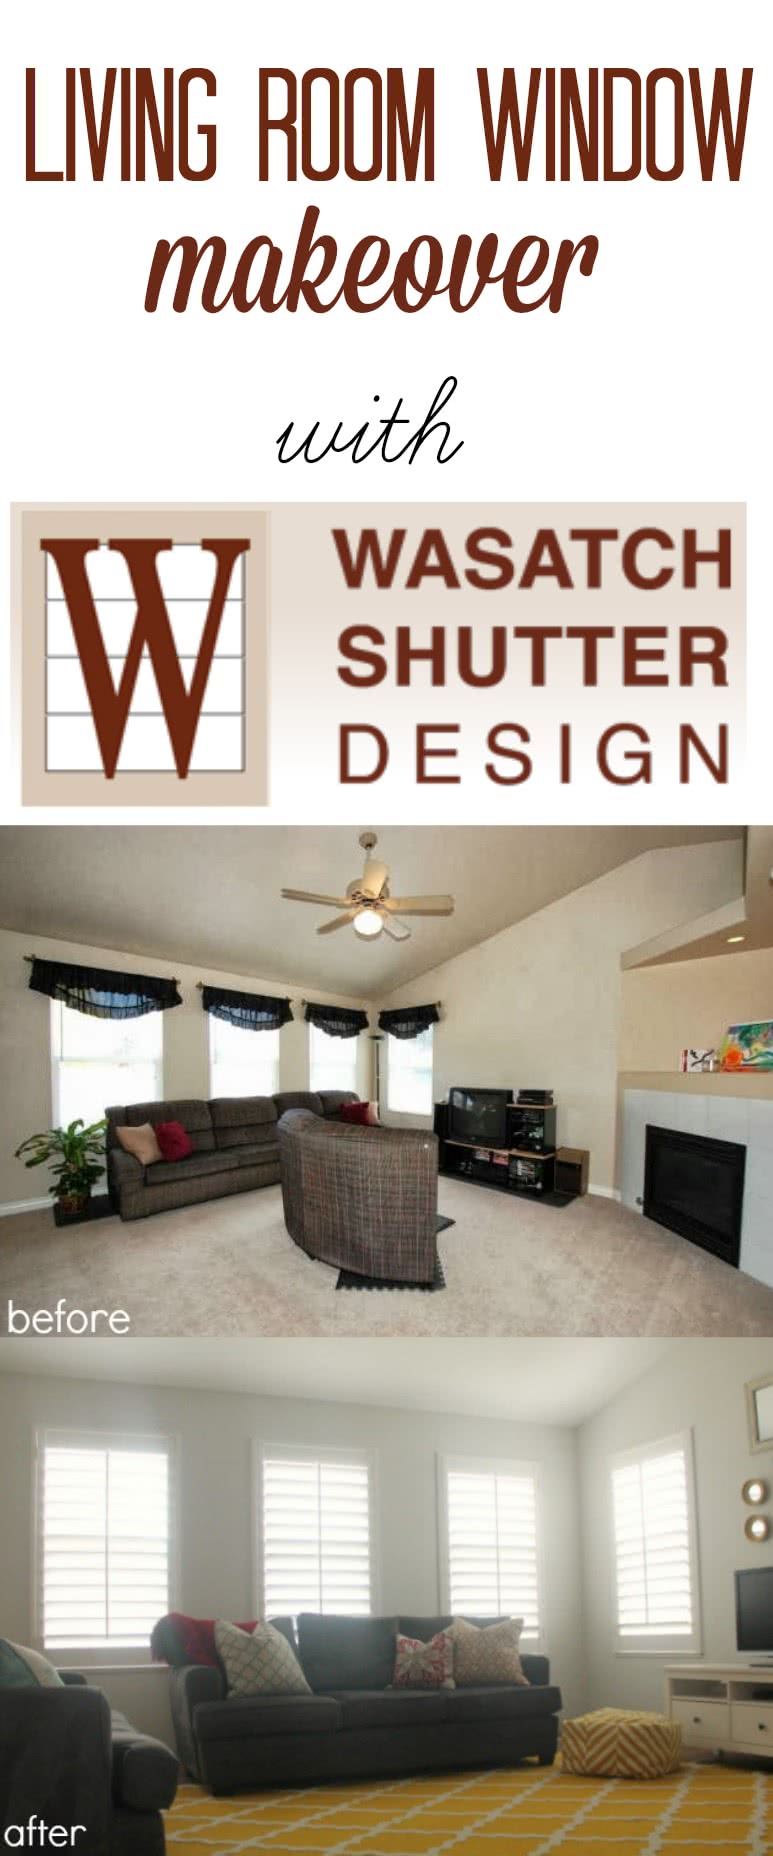 Living Room Window Makeover with Wasatch Shutters